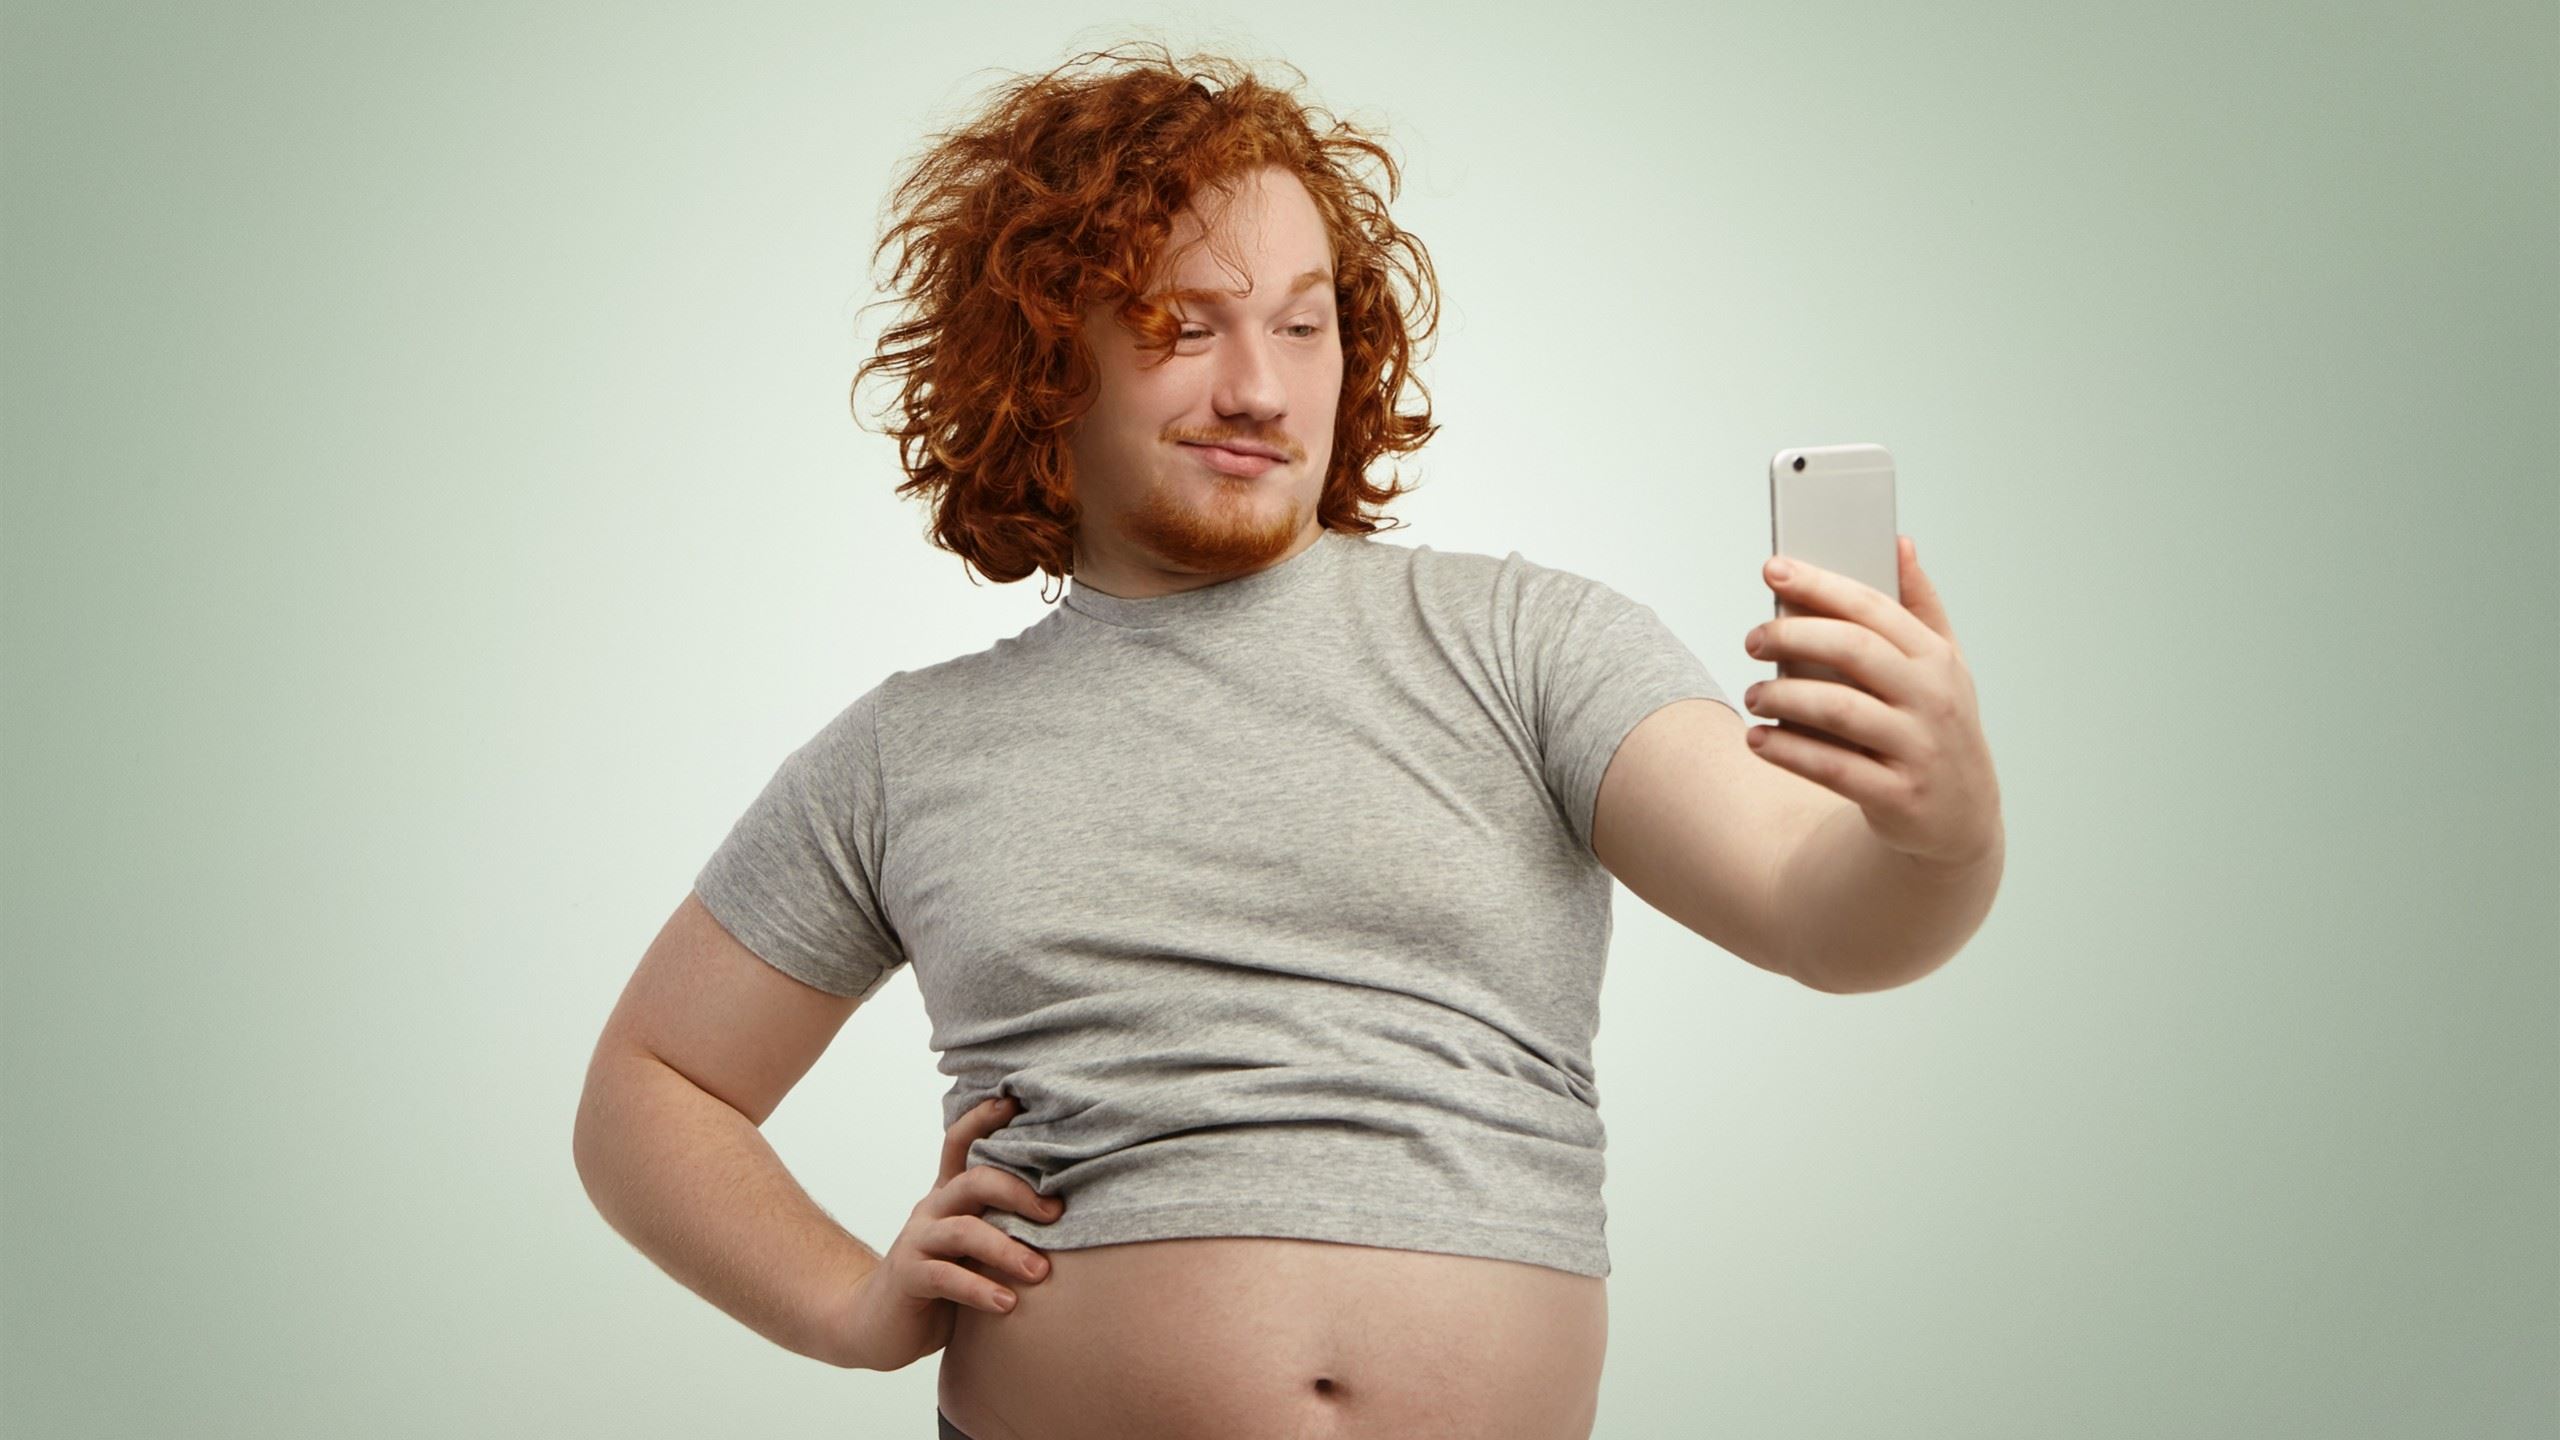 An overweight red-haired man taking confidently a selfie.